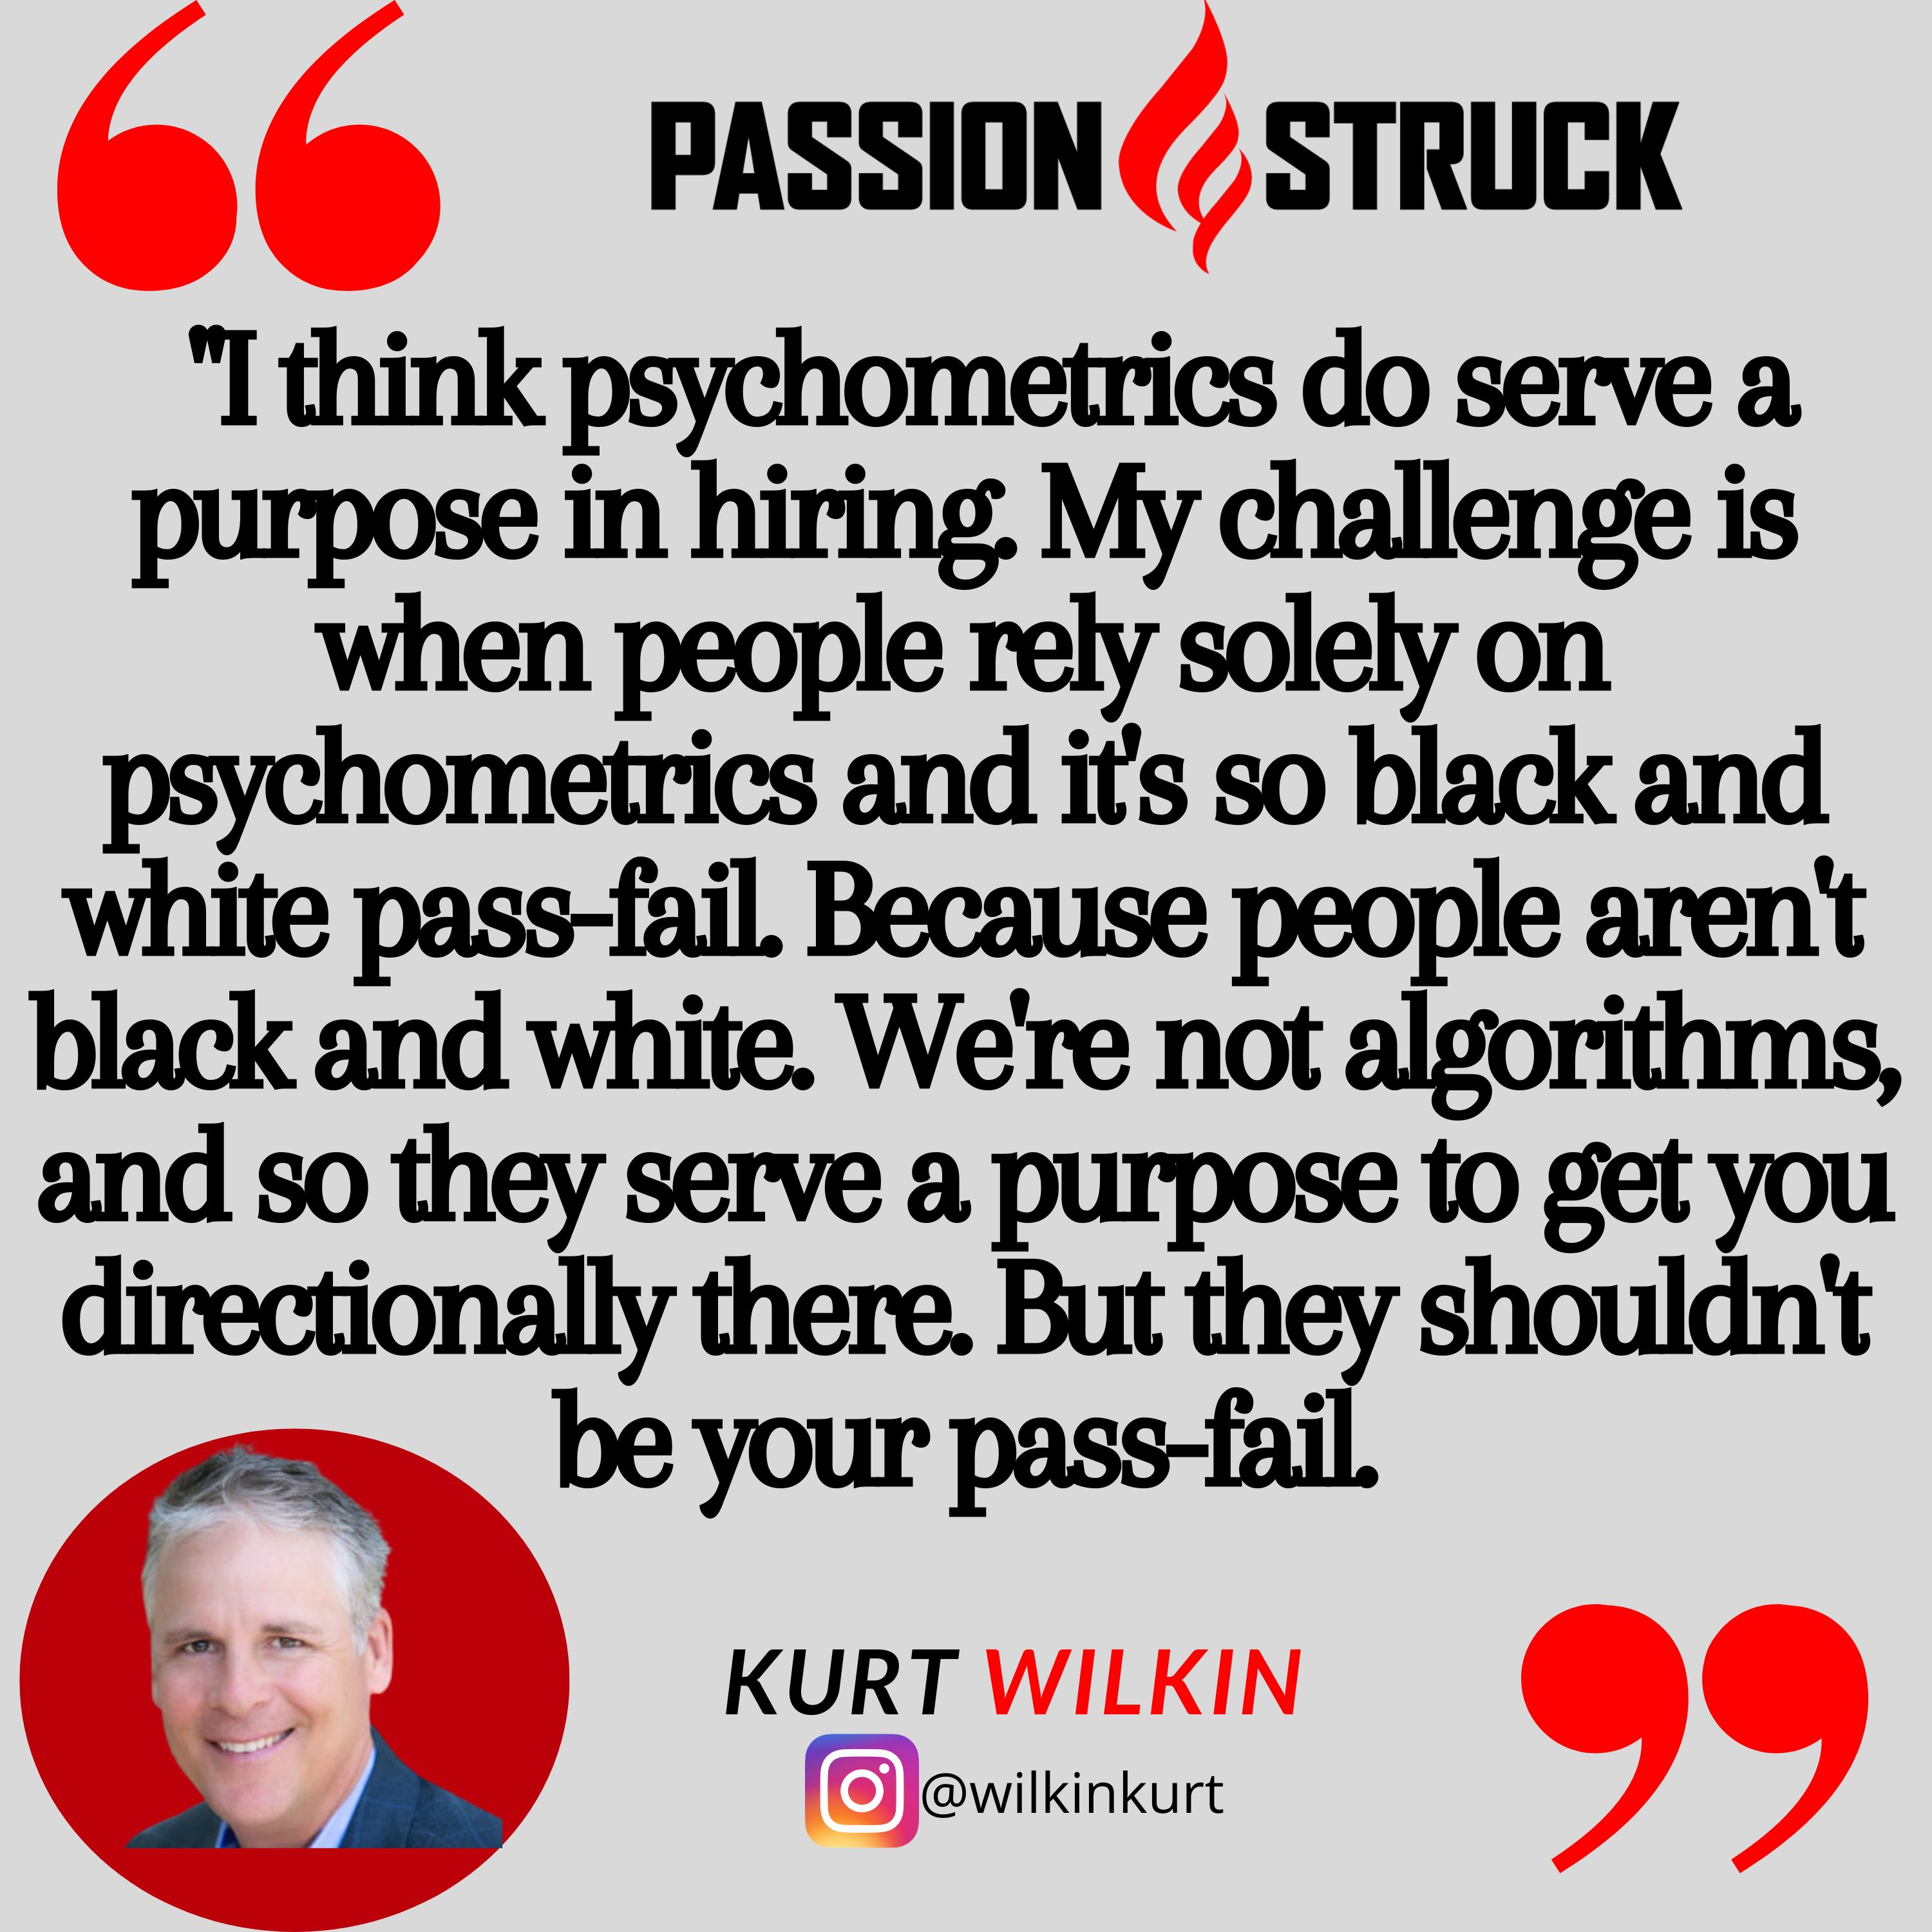 Kurt Wilkin quote from passion struck, "  "I think psychometrics do serve a purpose in hiring. My challenge is when people rely solely on psychometrics and it's so black and white pass-fail. Because people aren't black and white. We're not algorithms, and so they serve a purpose to get you directionally there. But they shouldn't be your pass-fail."